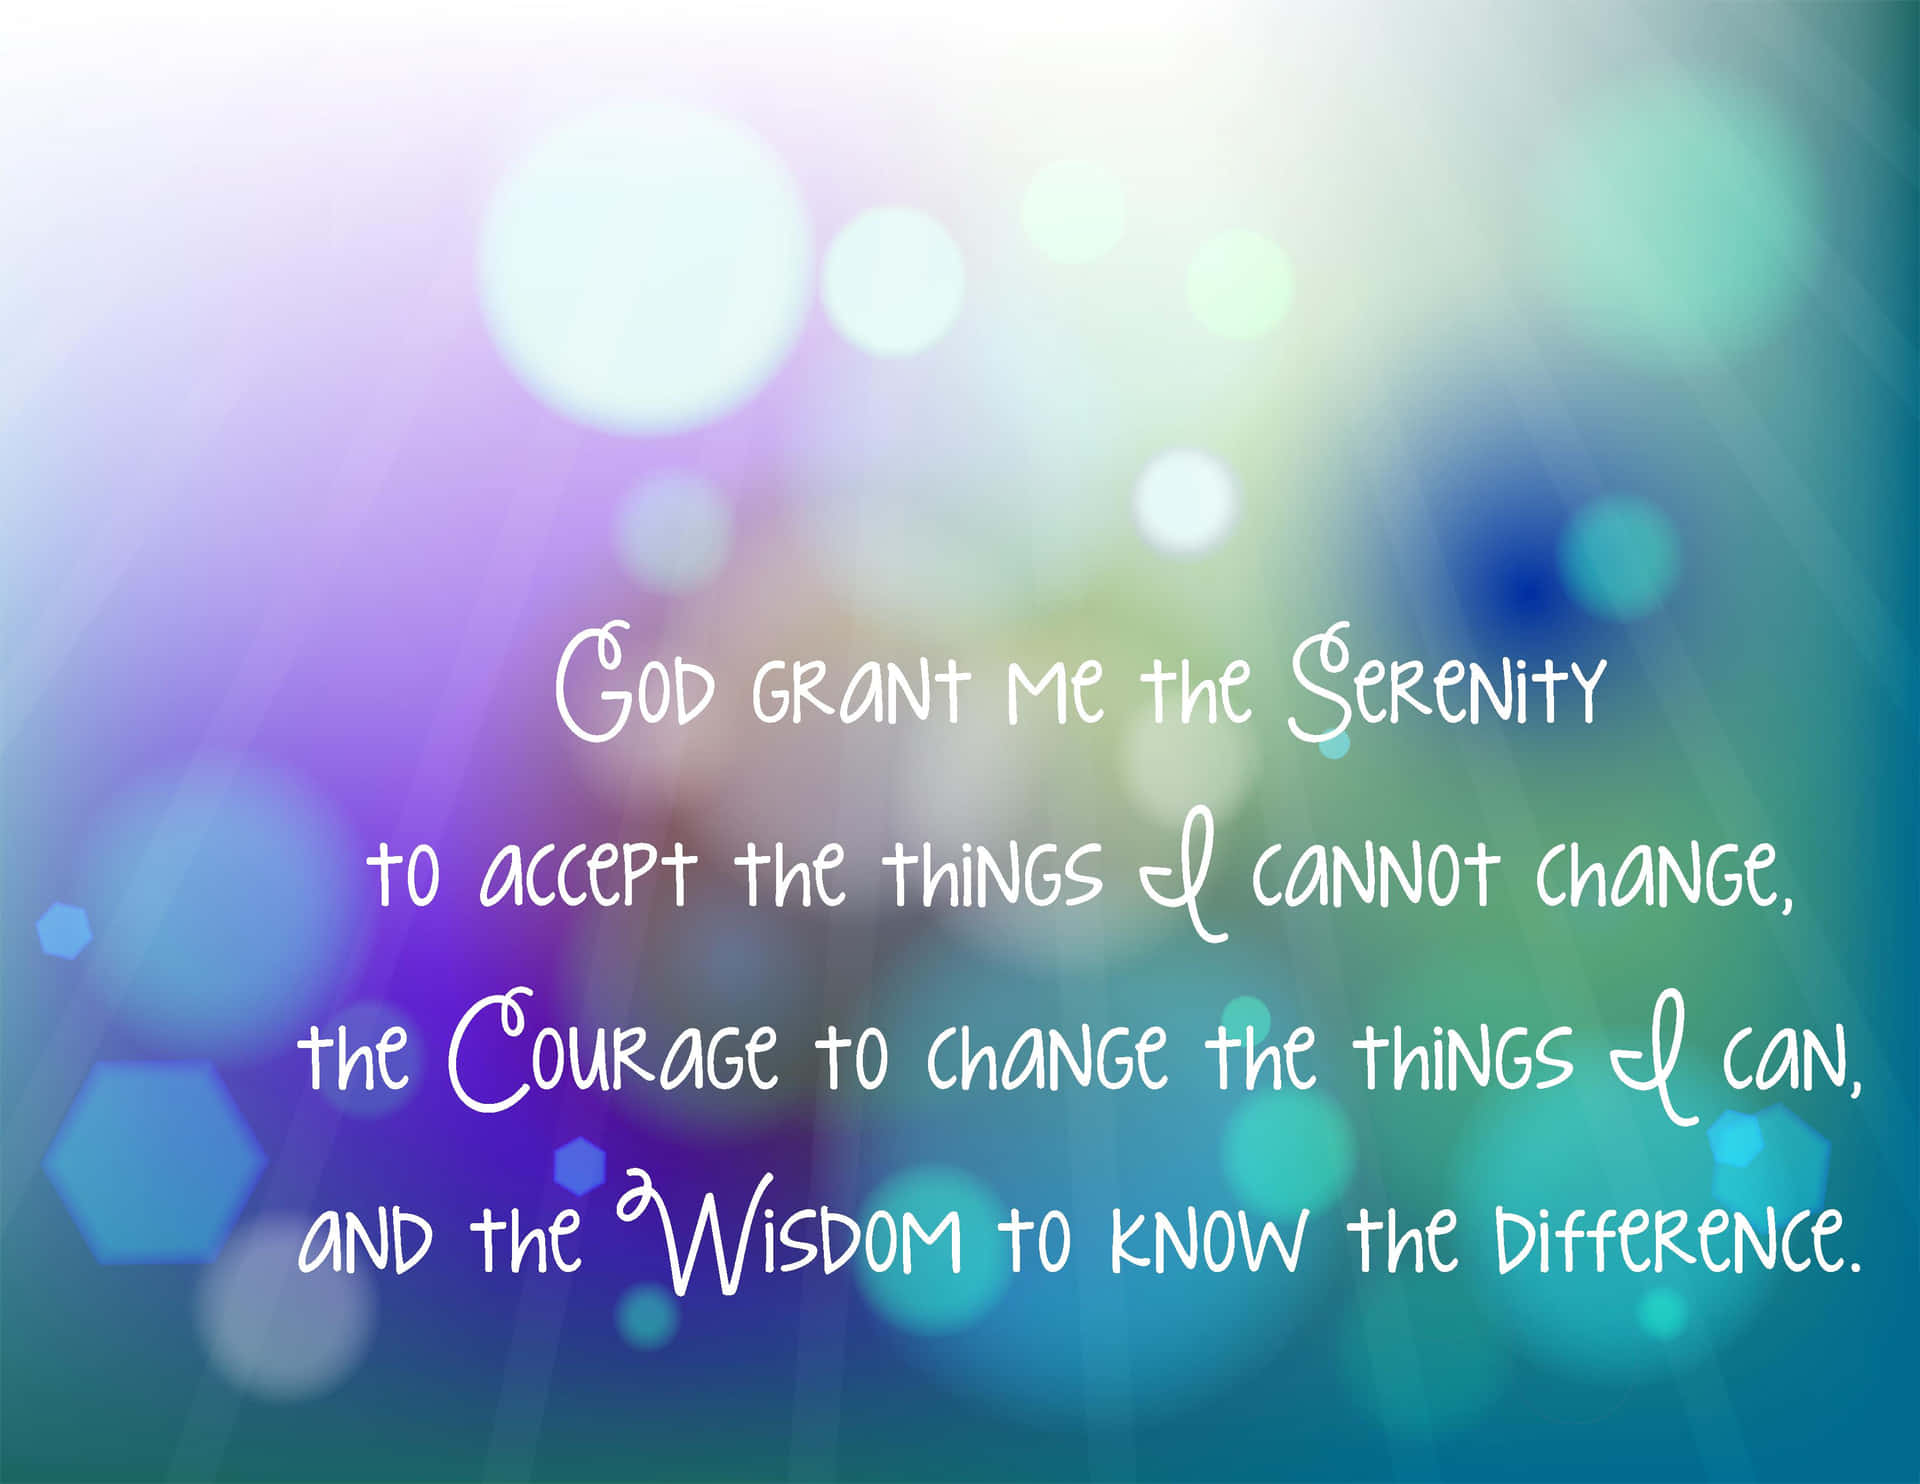 Find Peace In The Serenity Prayer Background